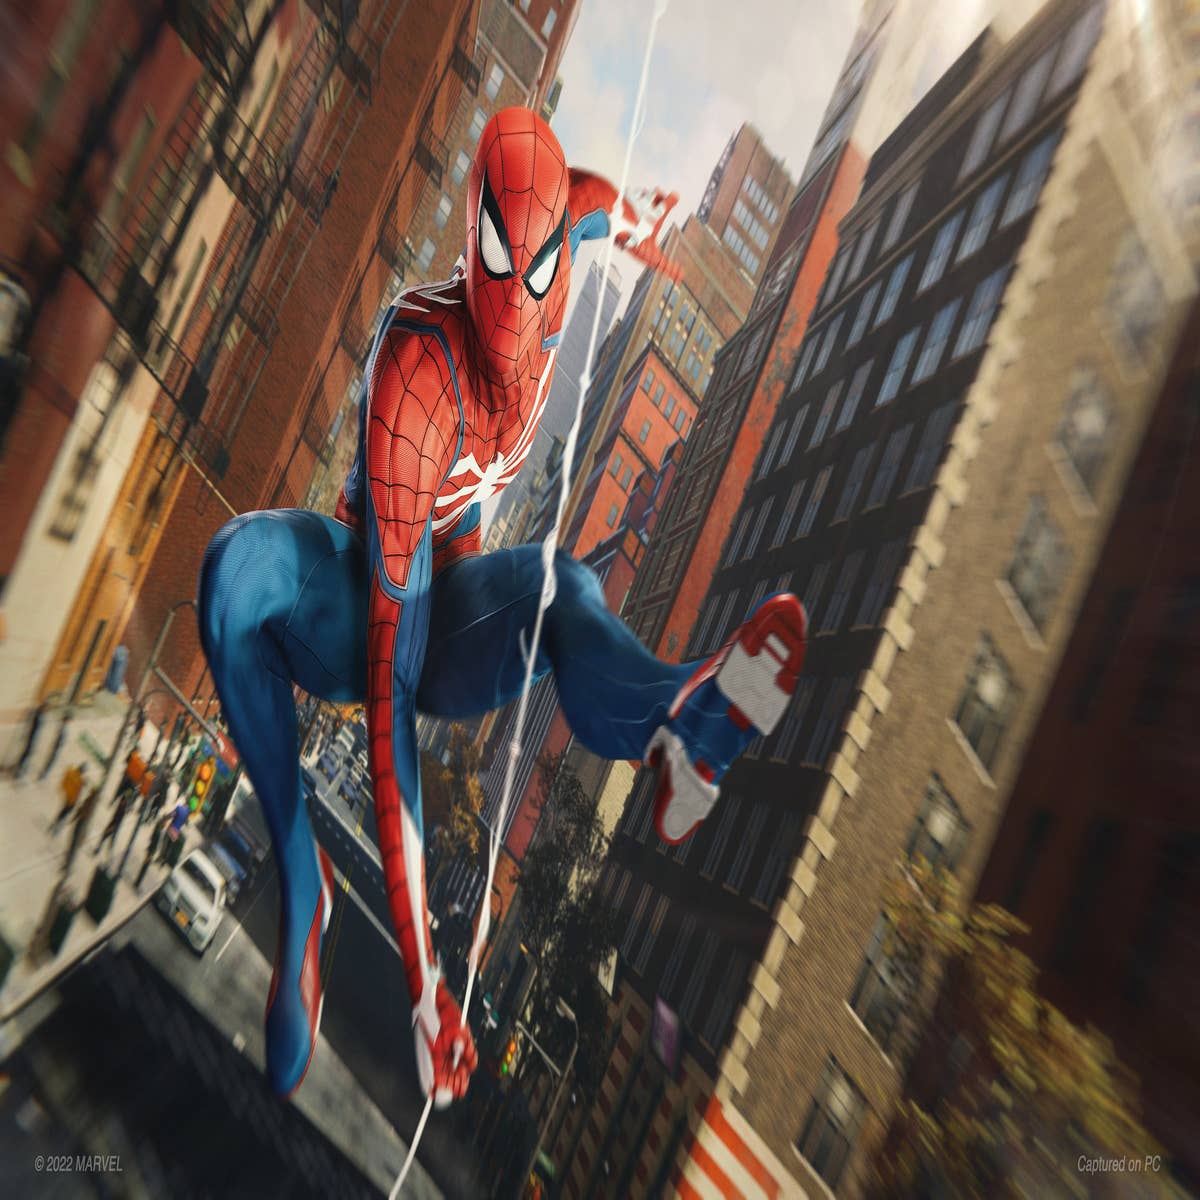 The Amazing Spider-Man games and more removed from Steam